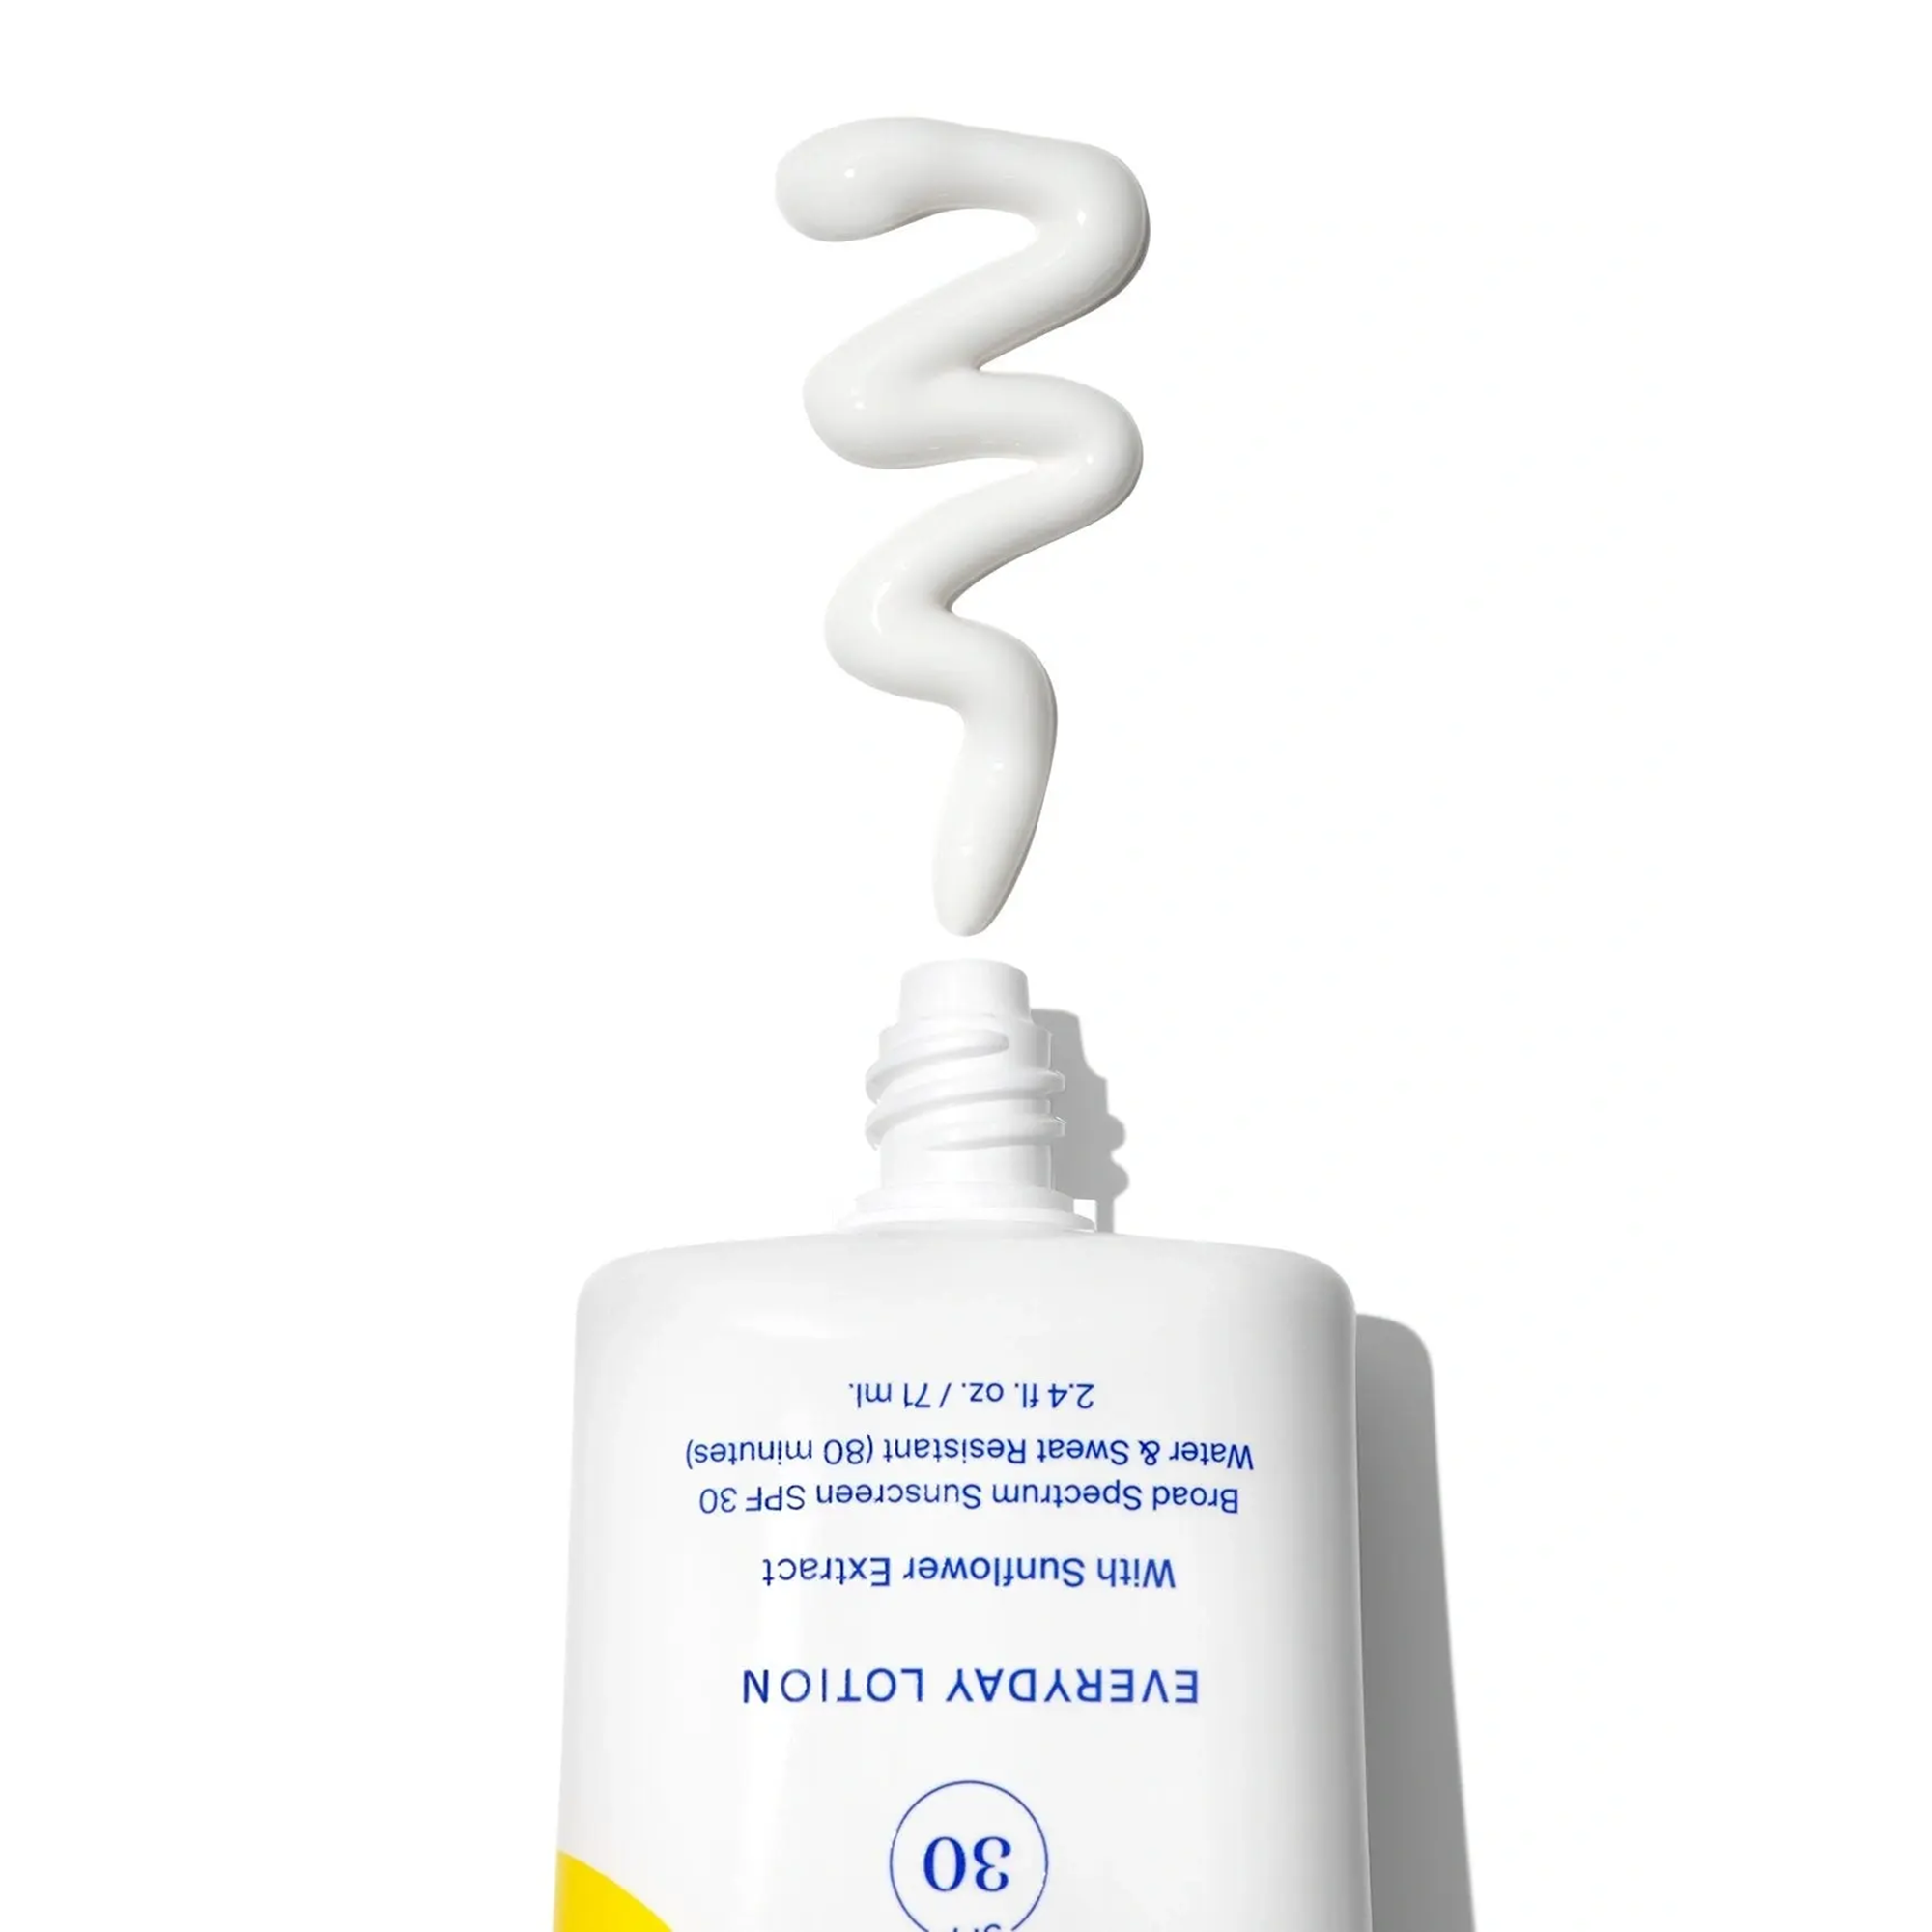 Supergoop! Play Everyday Lotion with Sunflower Extract Broad Spectrum Sunscreen - SPF 30 / 2.4OZ